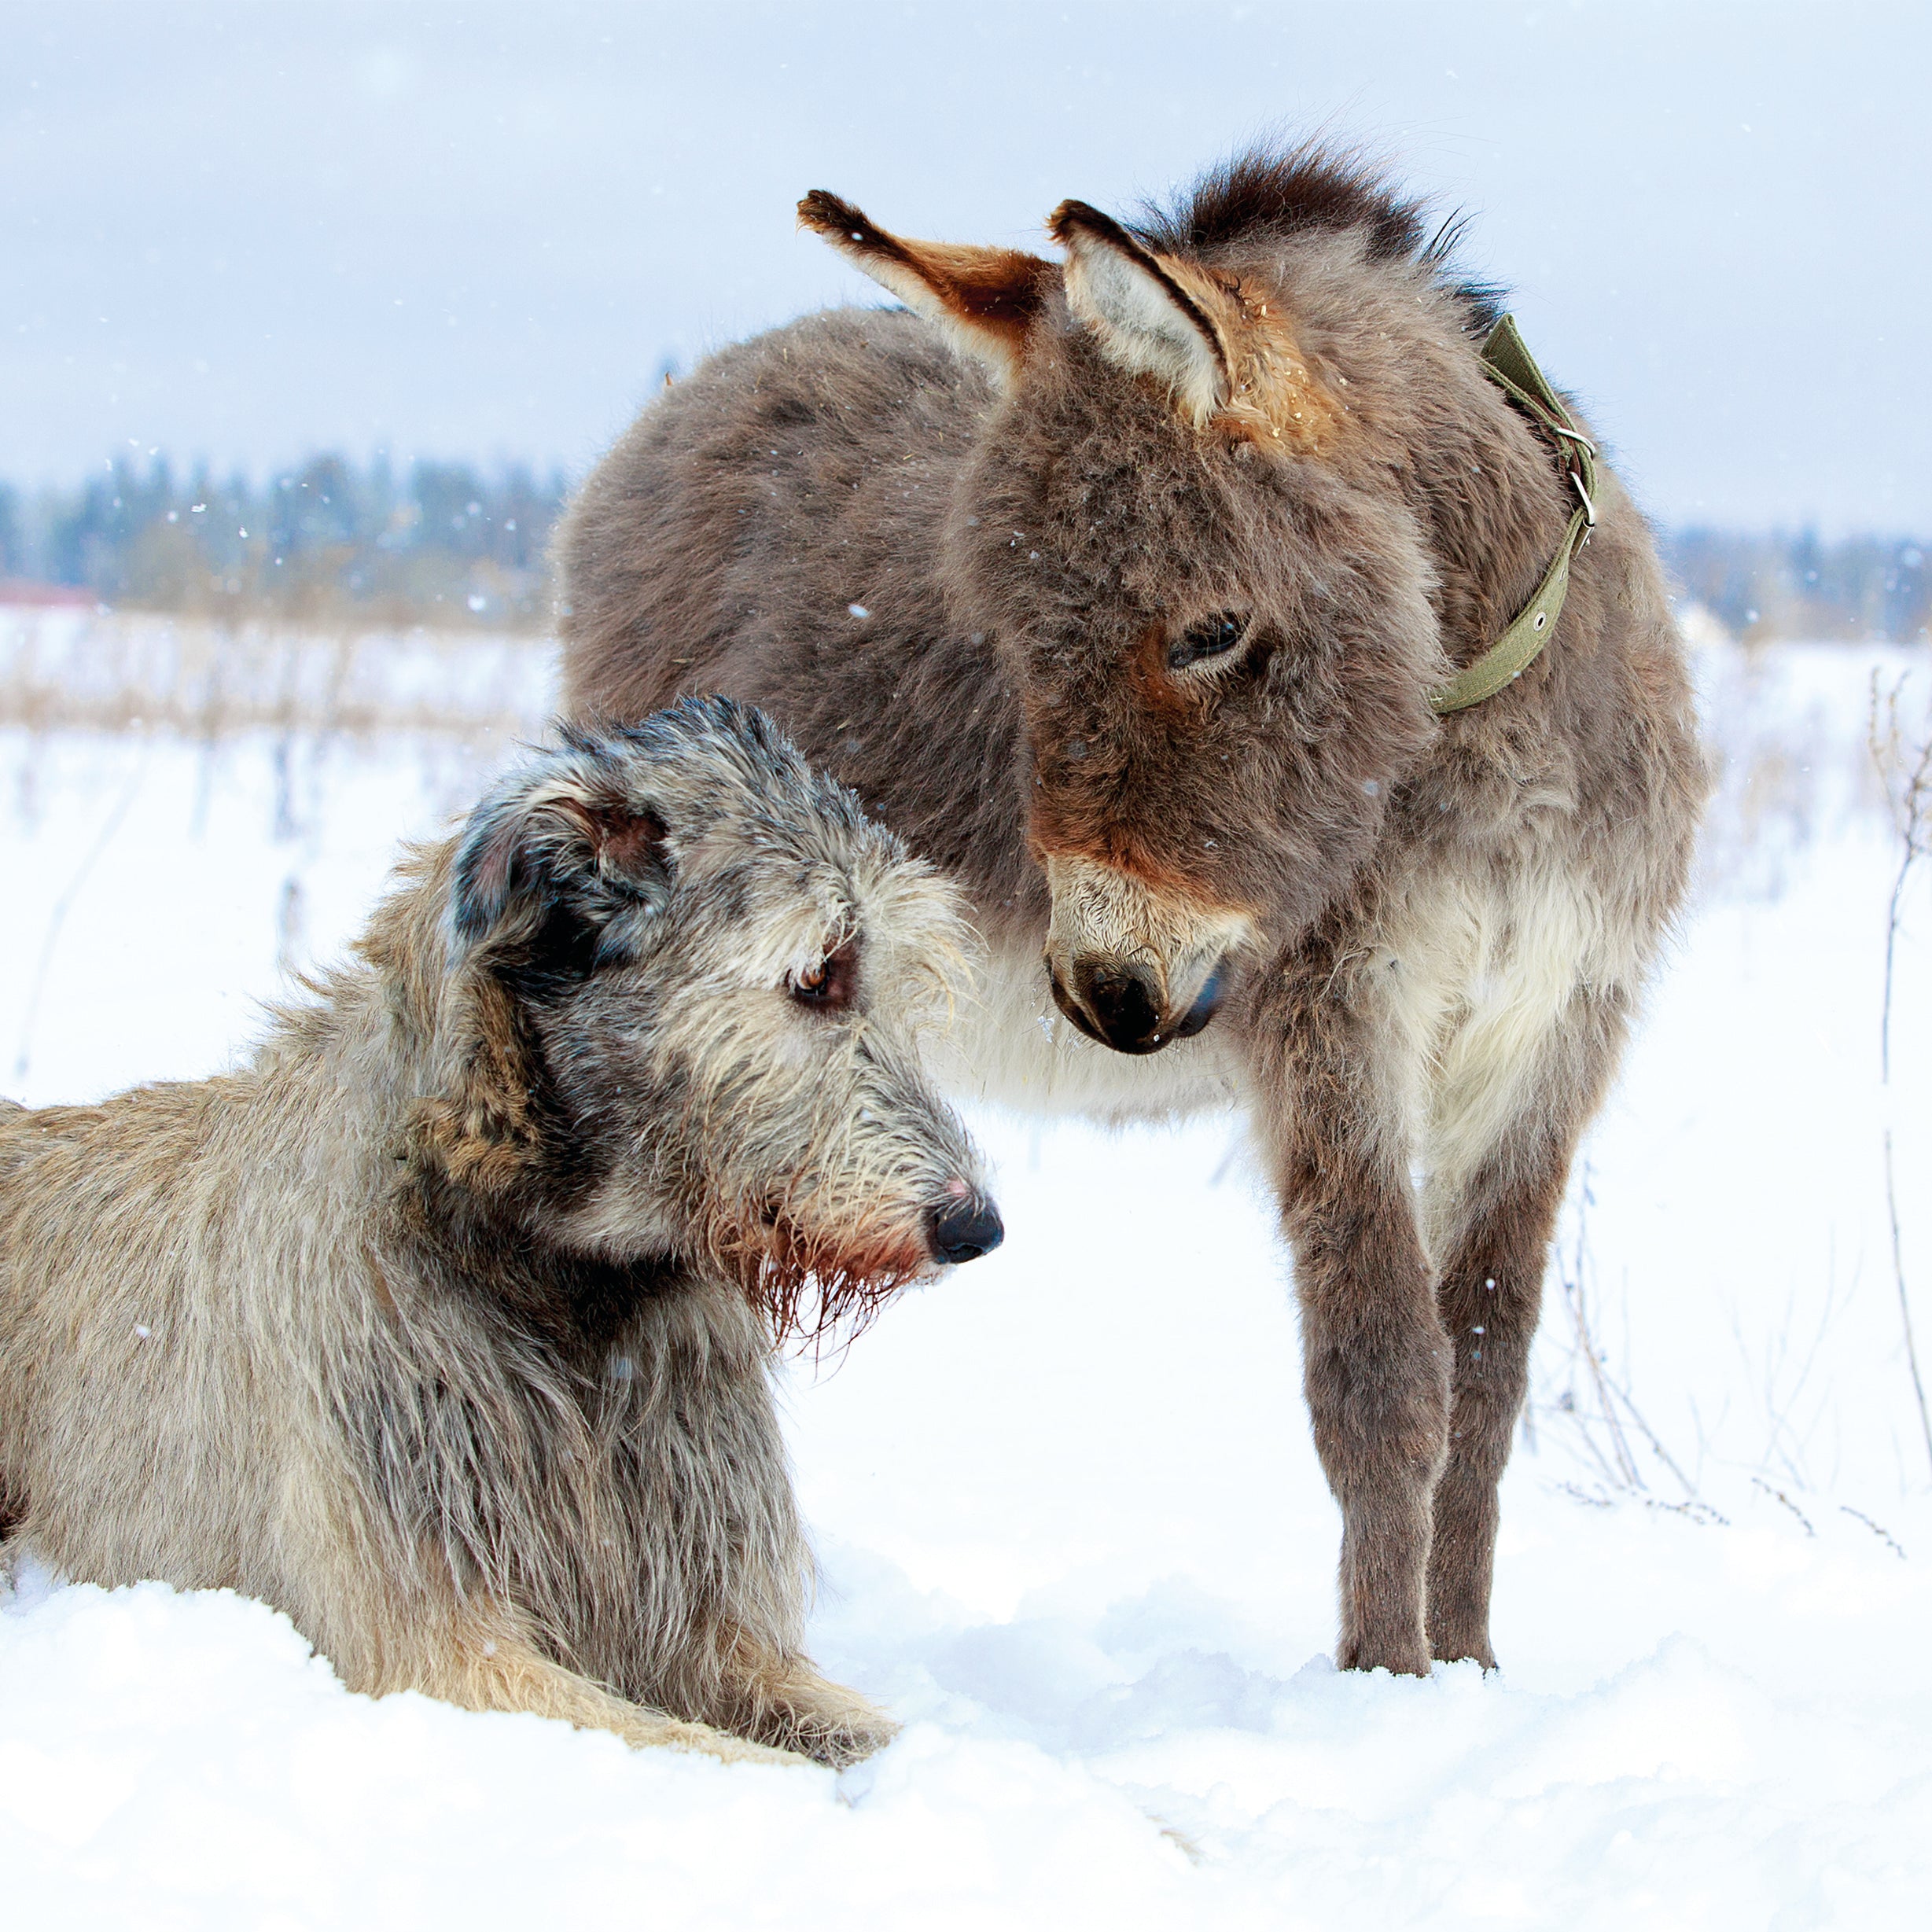 The design shows a photo of a donkey stood in snow, looking down at a Irish Wolfhound dog laying in the snow.